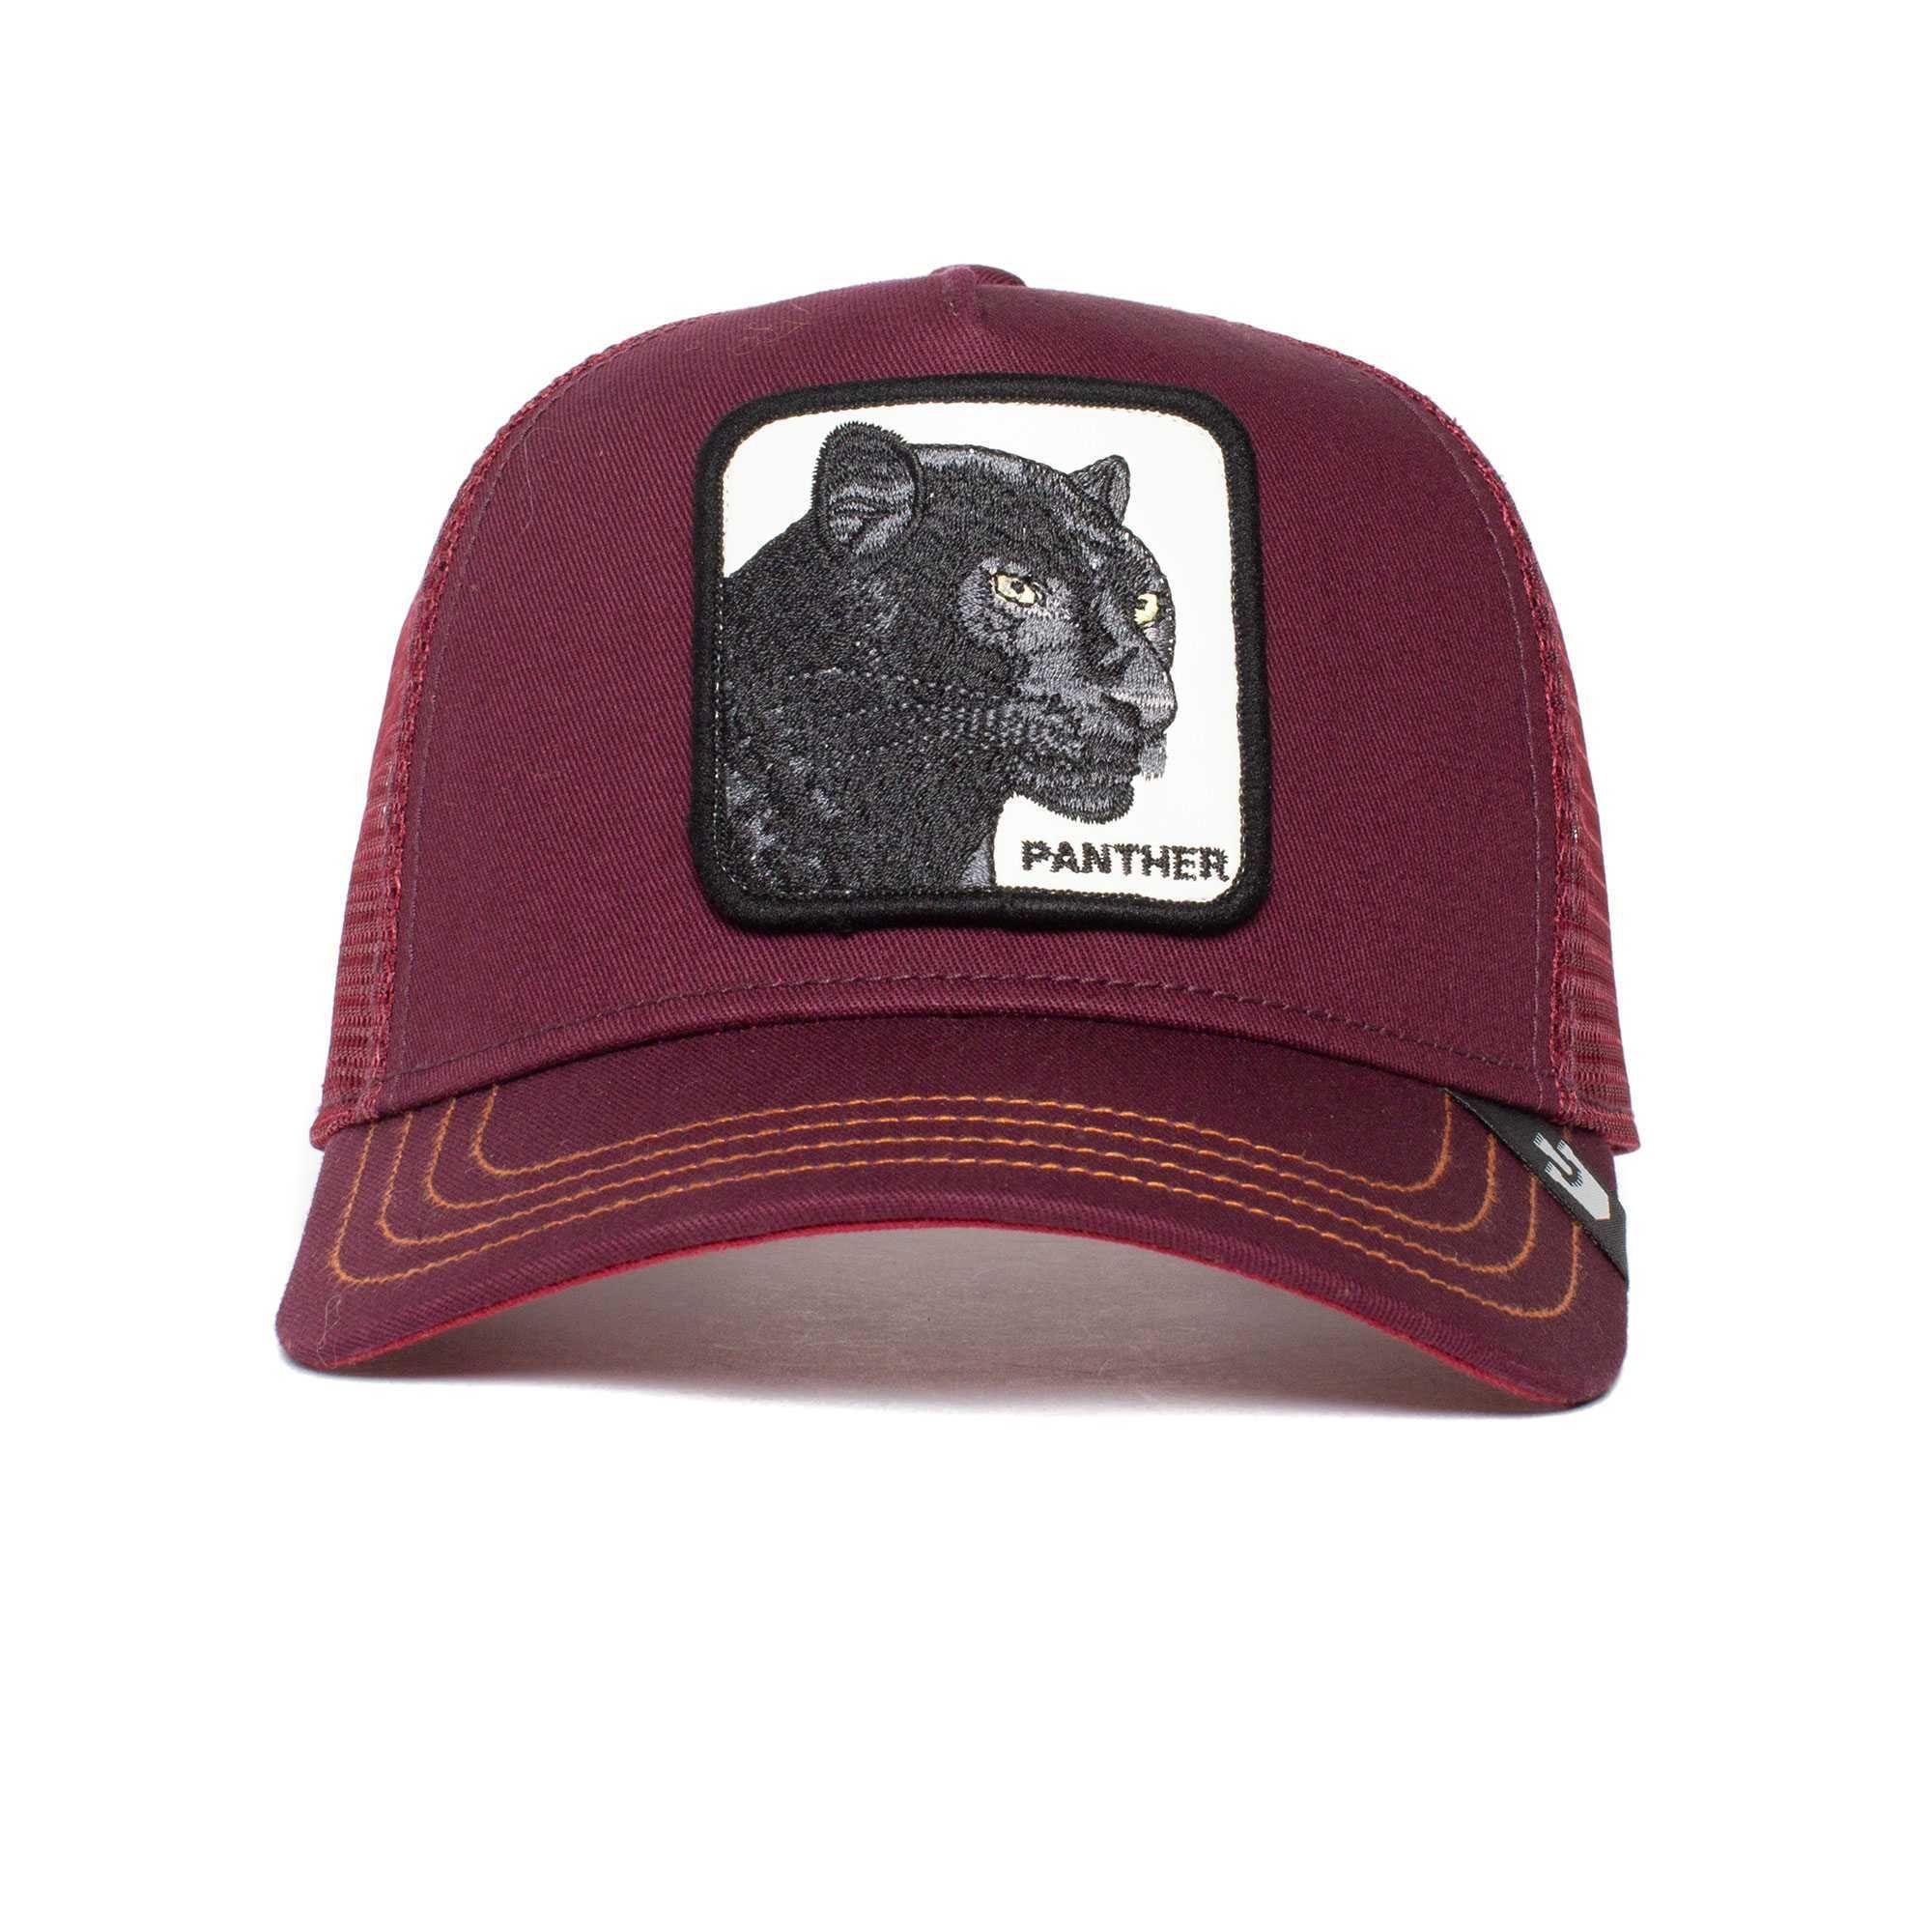 Size - Cap Unisex Kappe, Frontpatch, Trucker Baseball Bros. Panther maroon The One Cap GOORIN